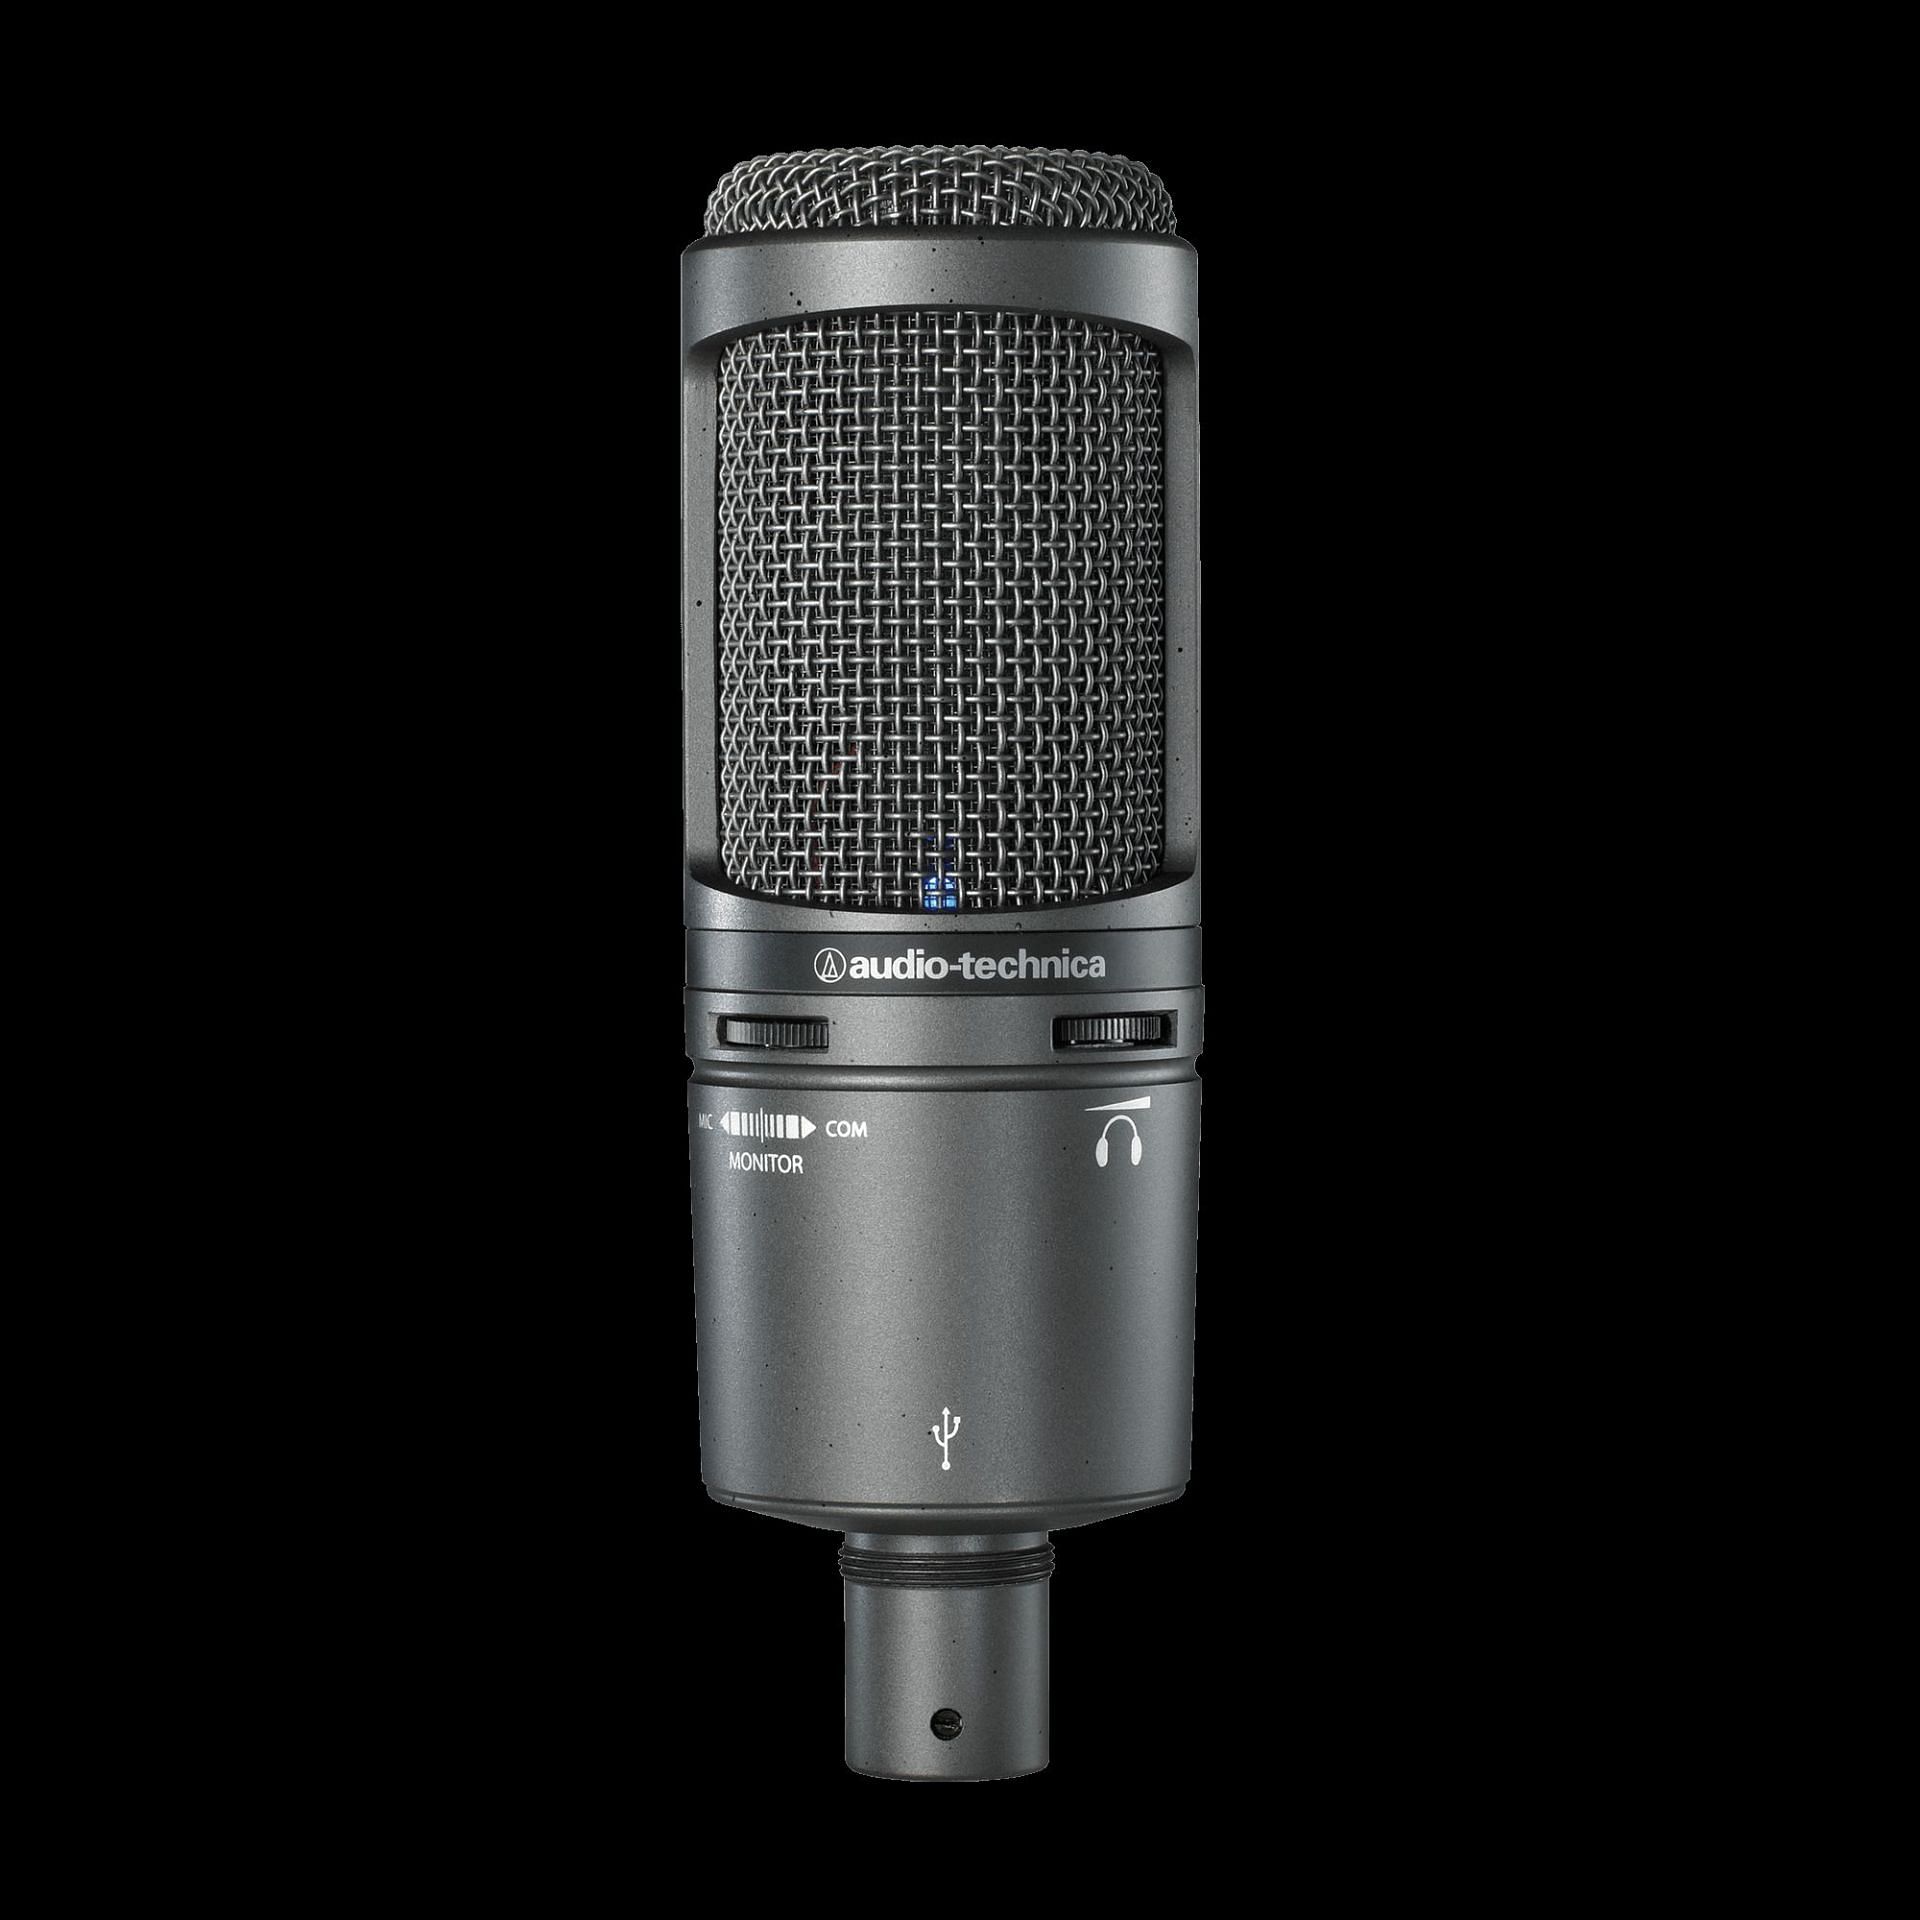 A revised version of an already great microphone (Image via Audio-Technica)